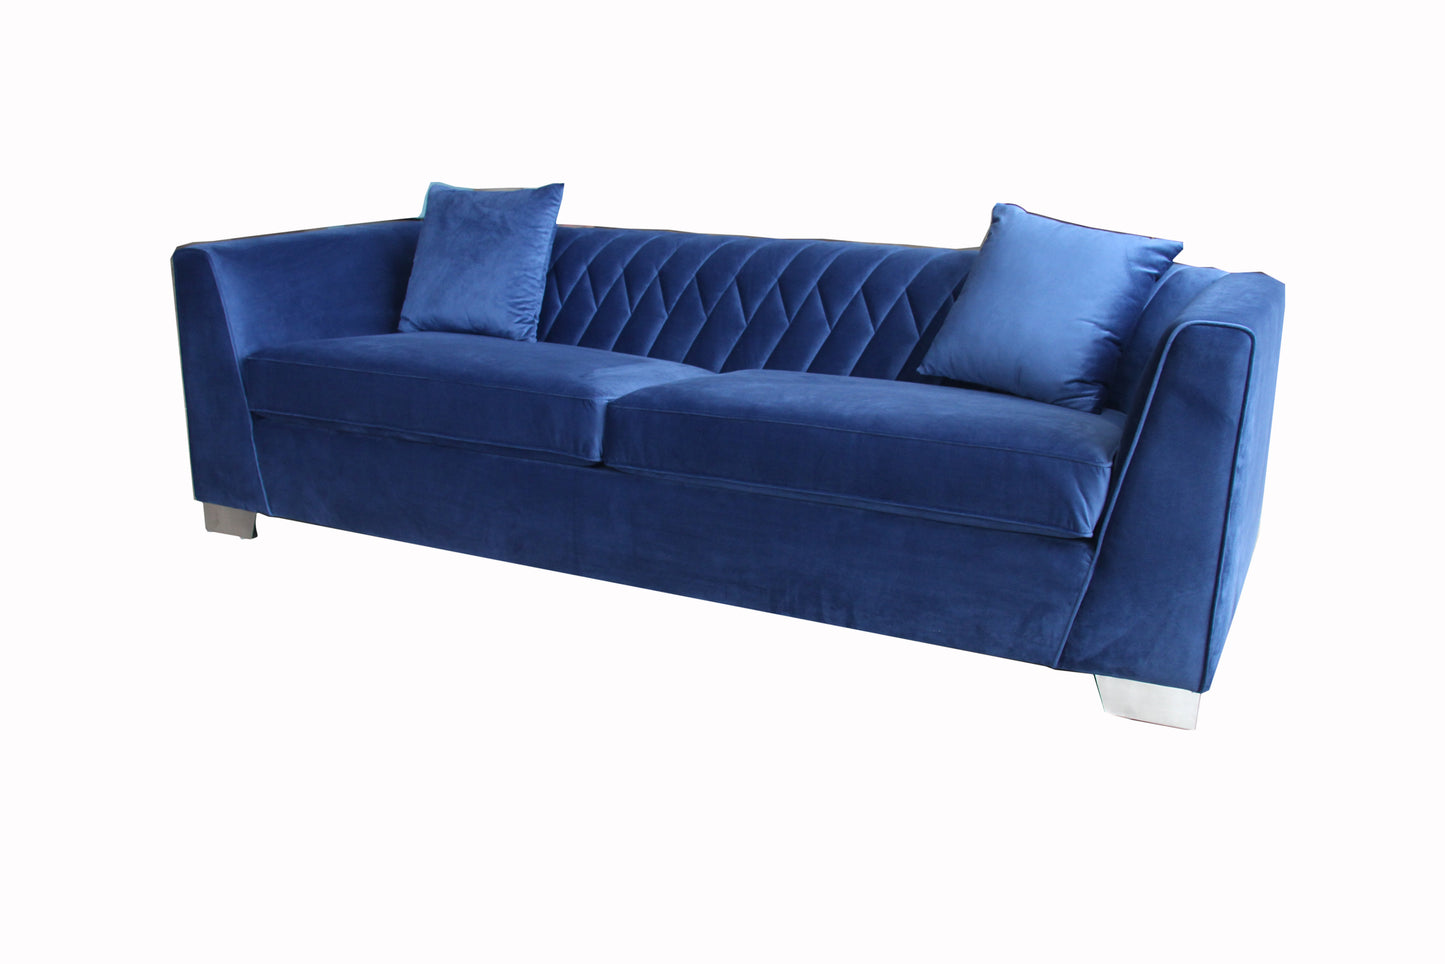 Cambridge Contemporary Sofa in Brushed Stainless Steel and Blue Velvet